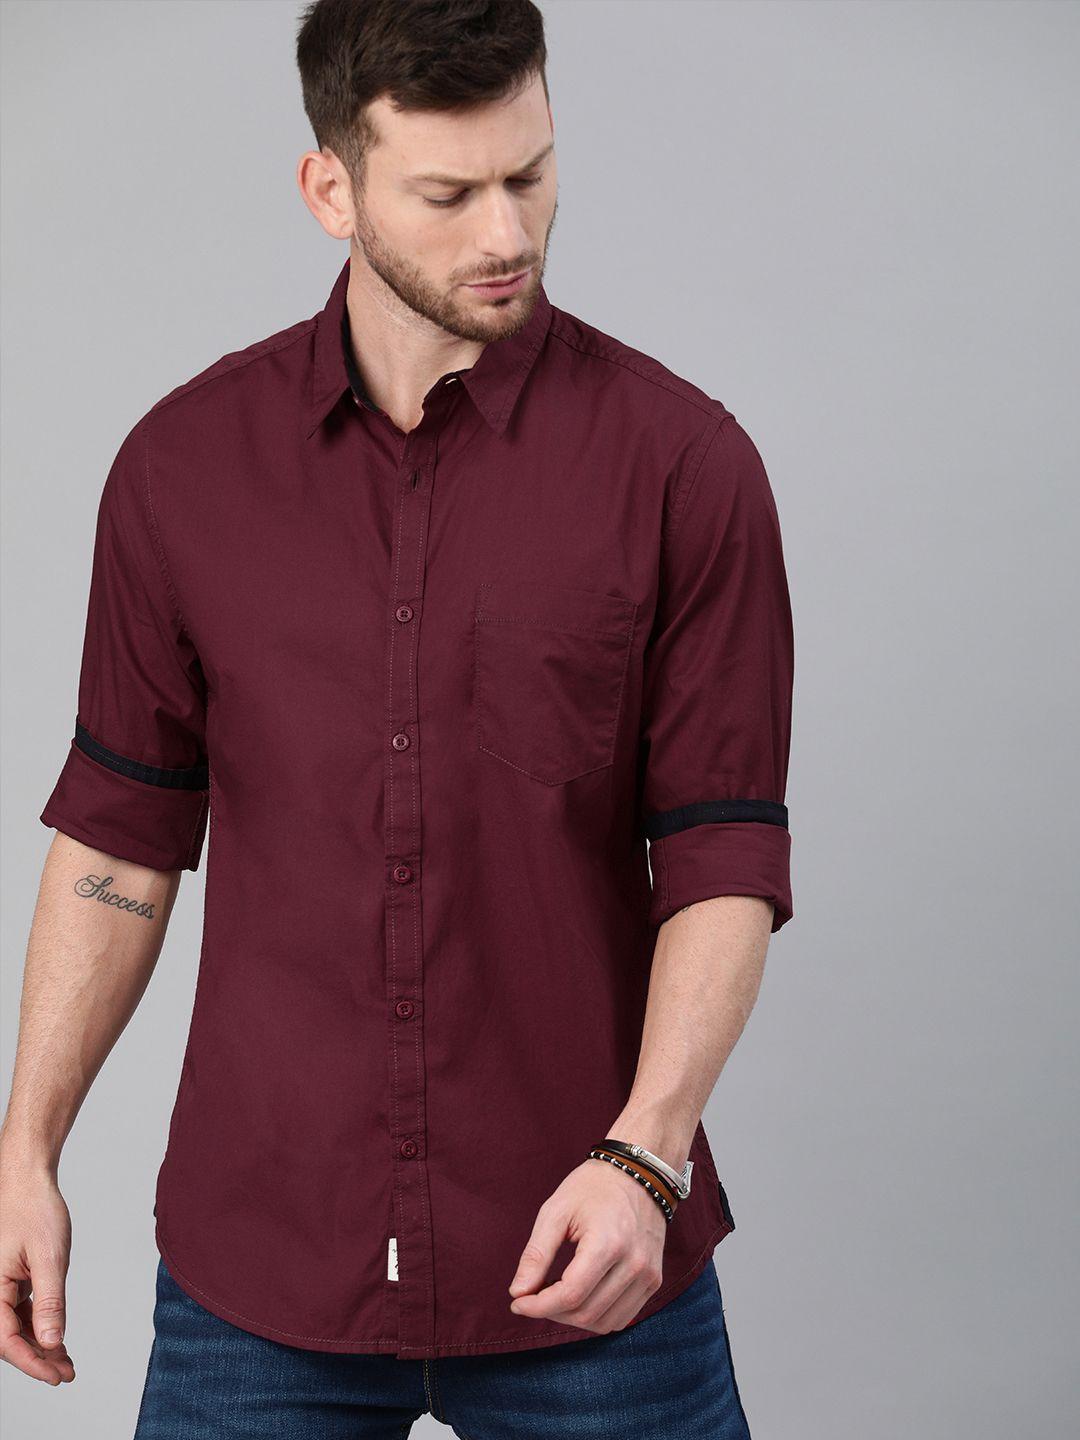 roadster-men-maroon-pure-cotton-sustainable-casual-shirt